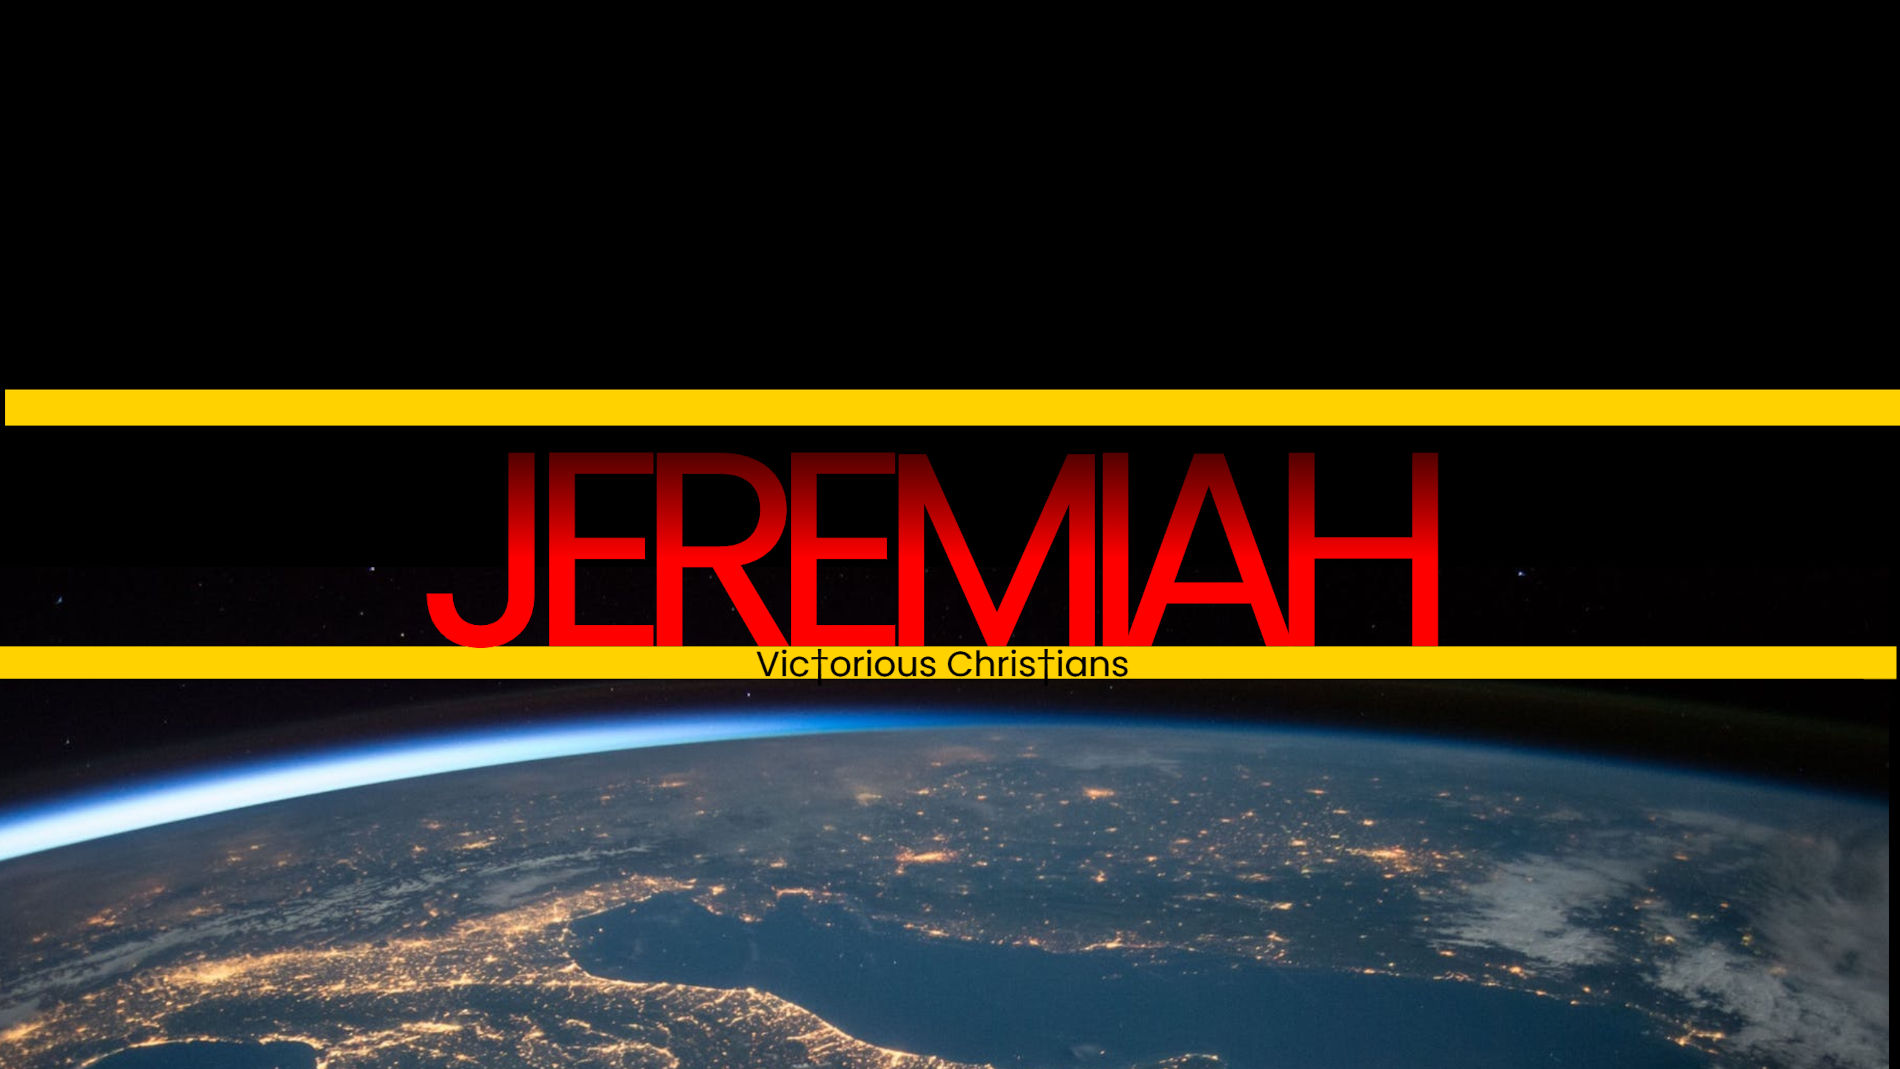 Book of Jeremiah